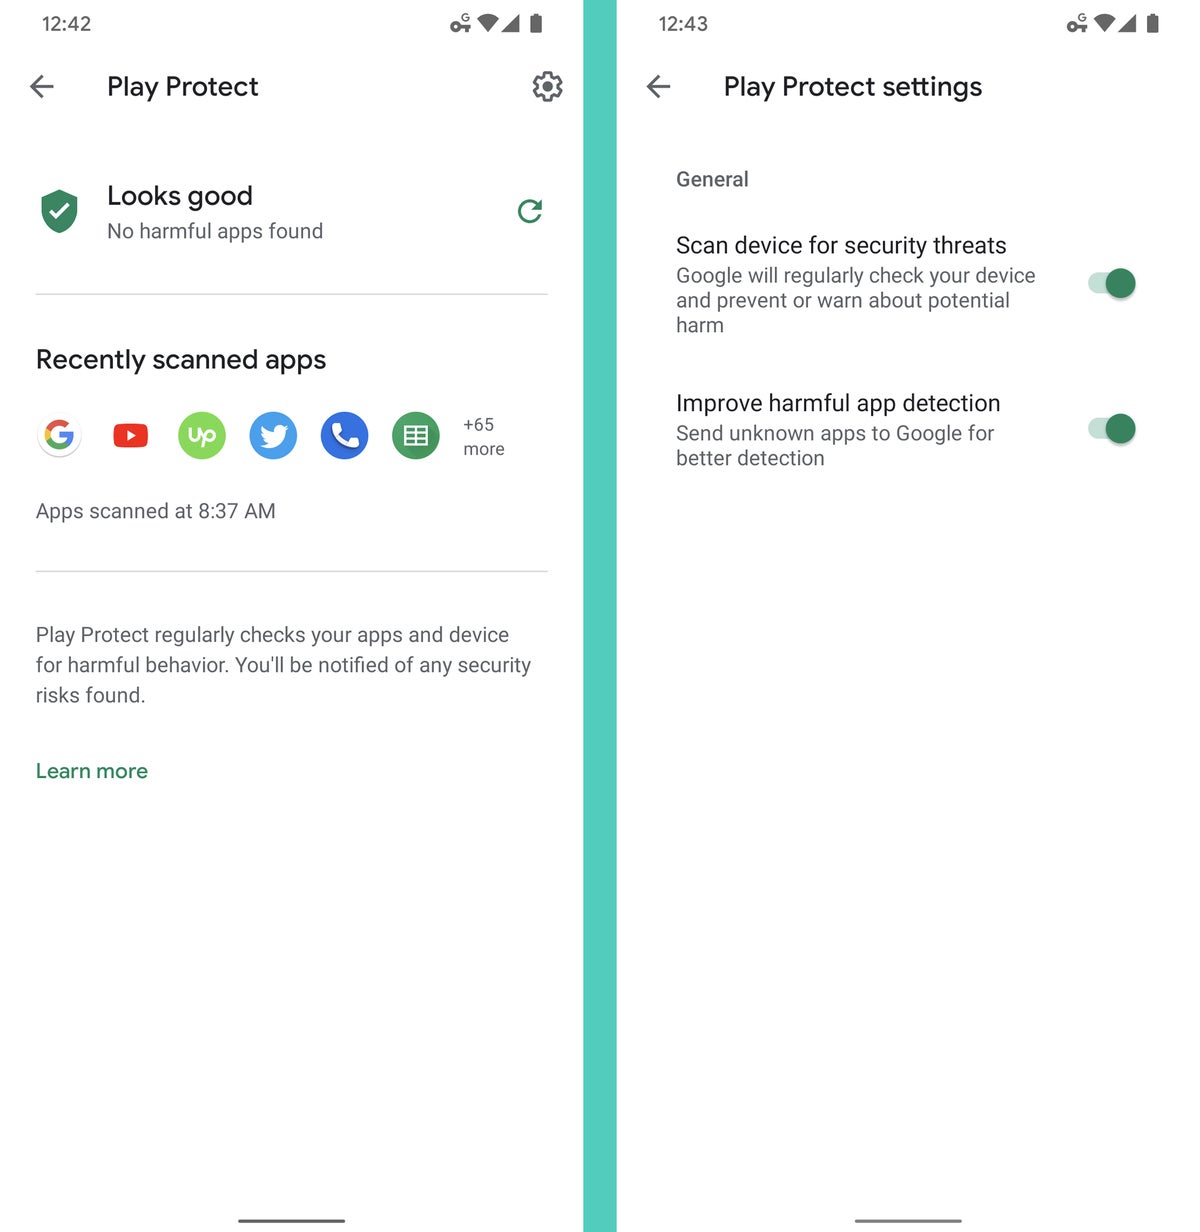 Android Security Audit: Play Protect